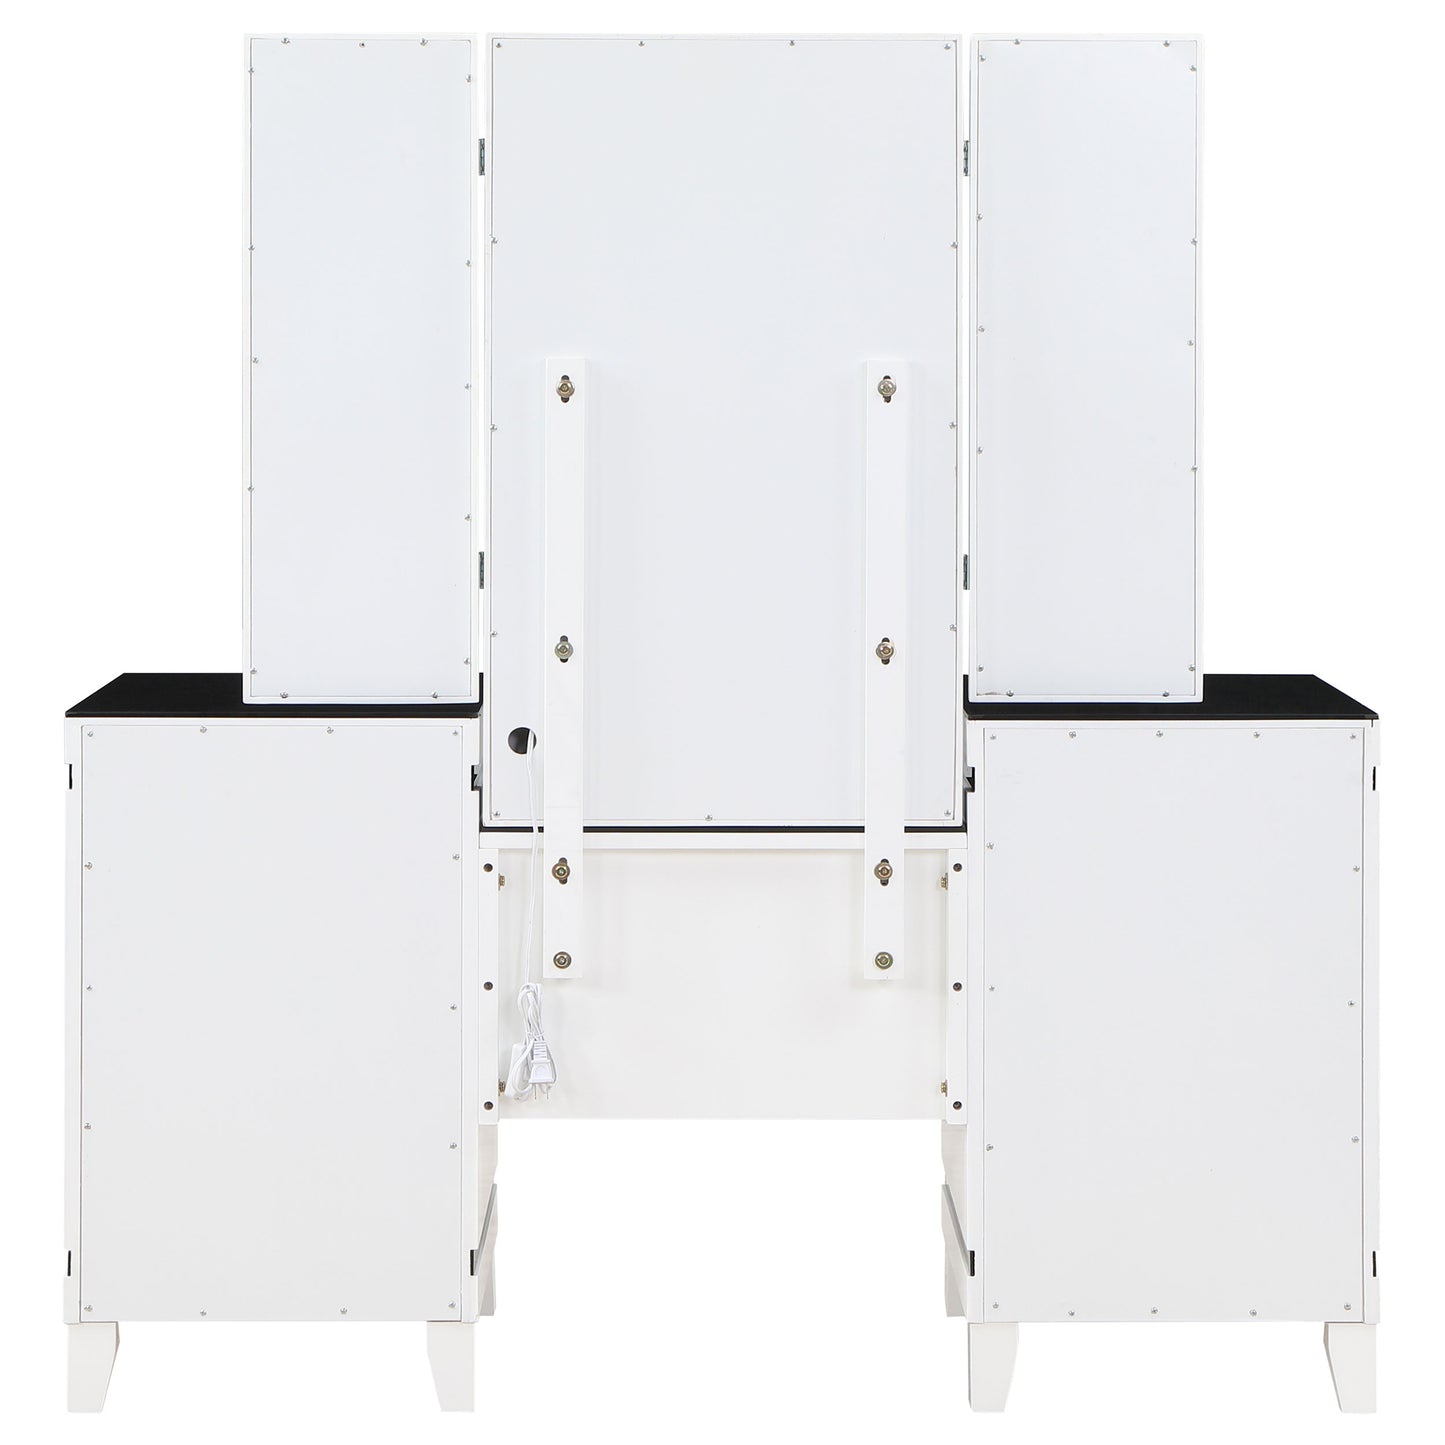 Talei 6-drawer Vanity Set with Hollywood Lighting Black and White